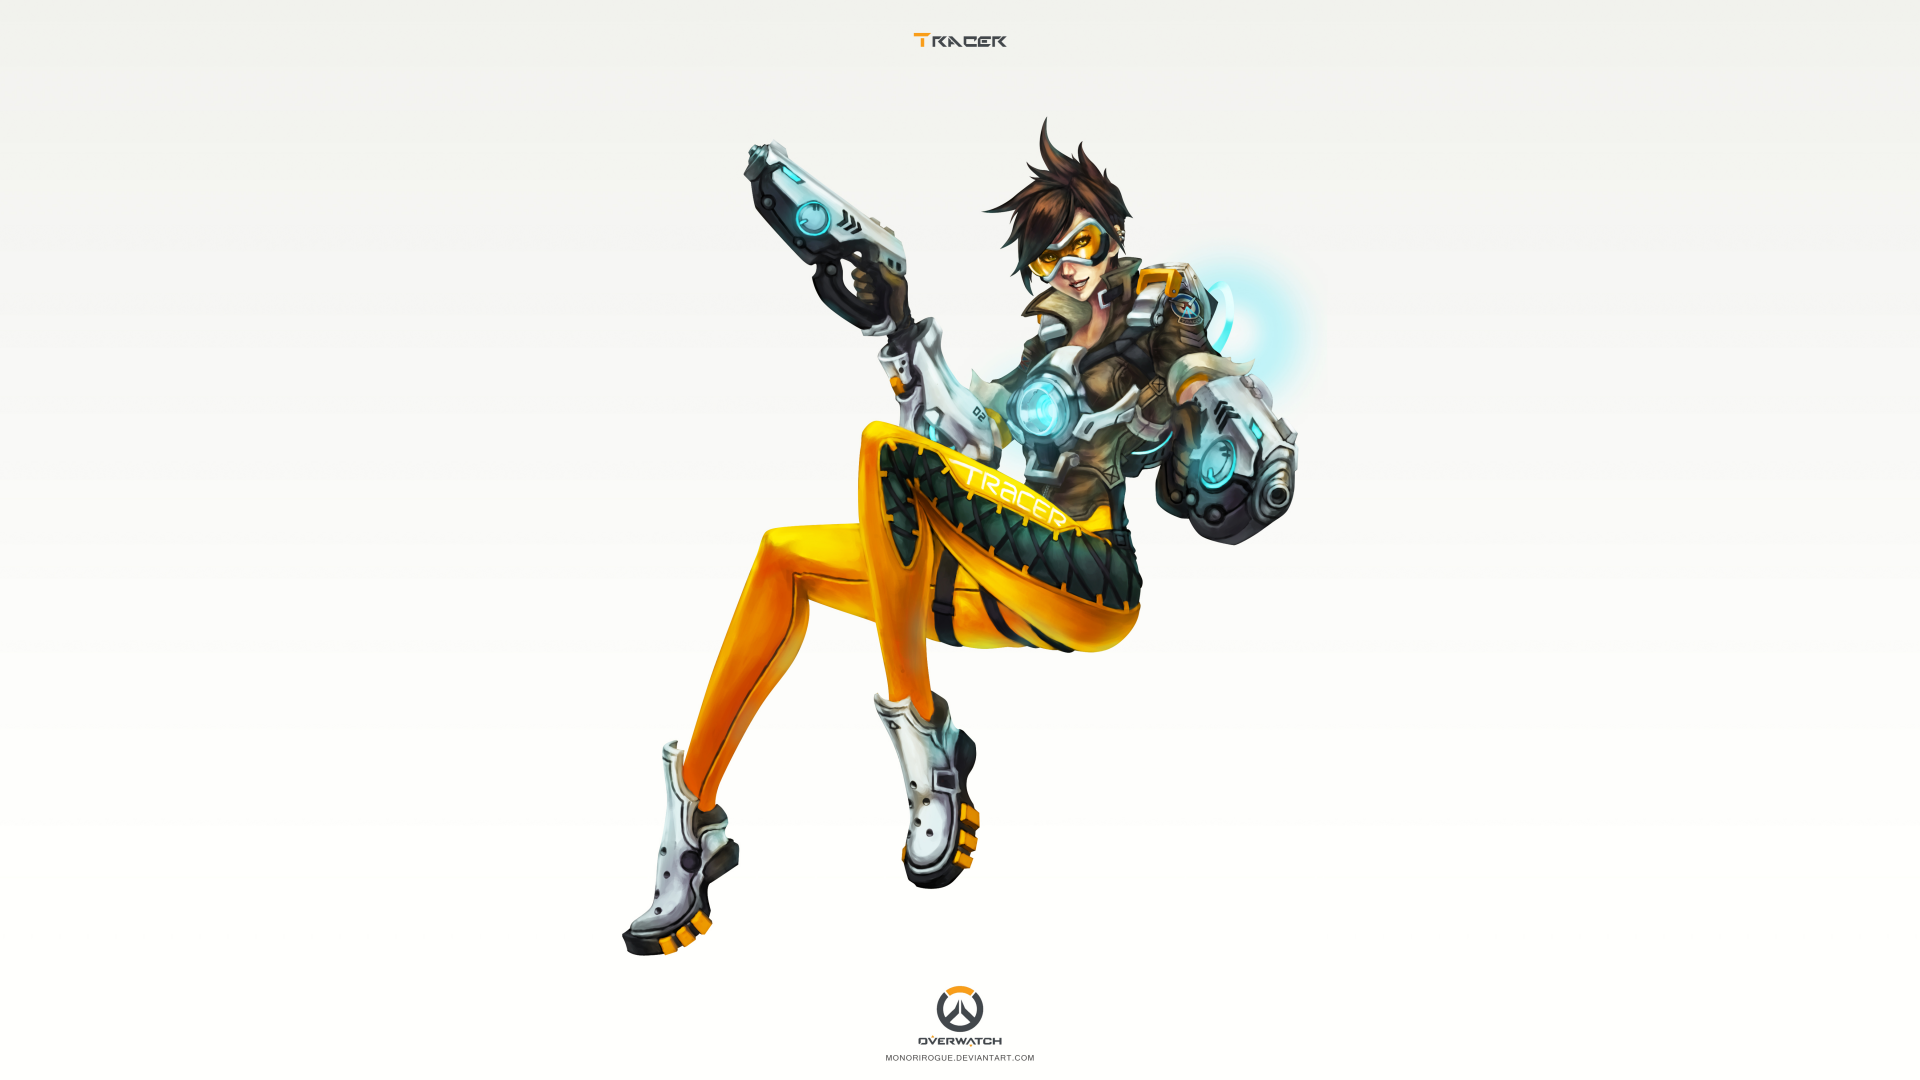 Download Tracer Overwatch Video Game Overwatch 4k Ultra Hd Wallpaper By Monori Rogue